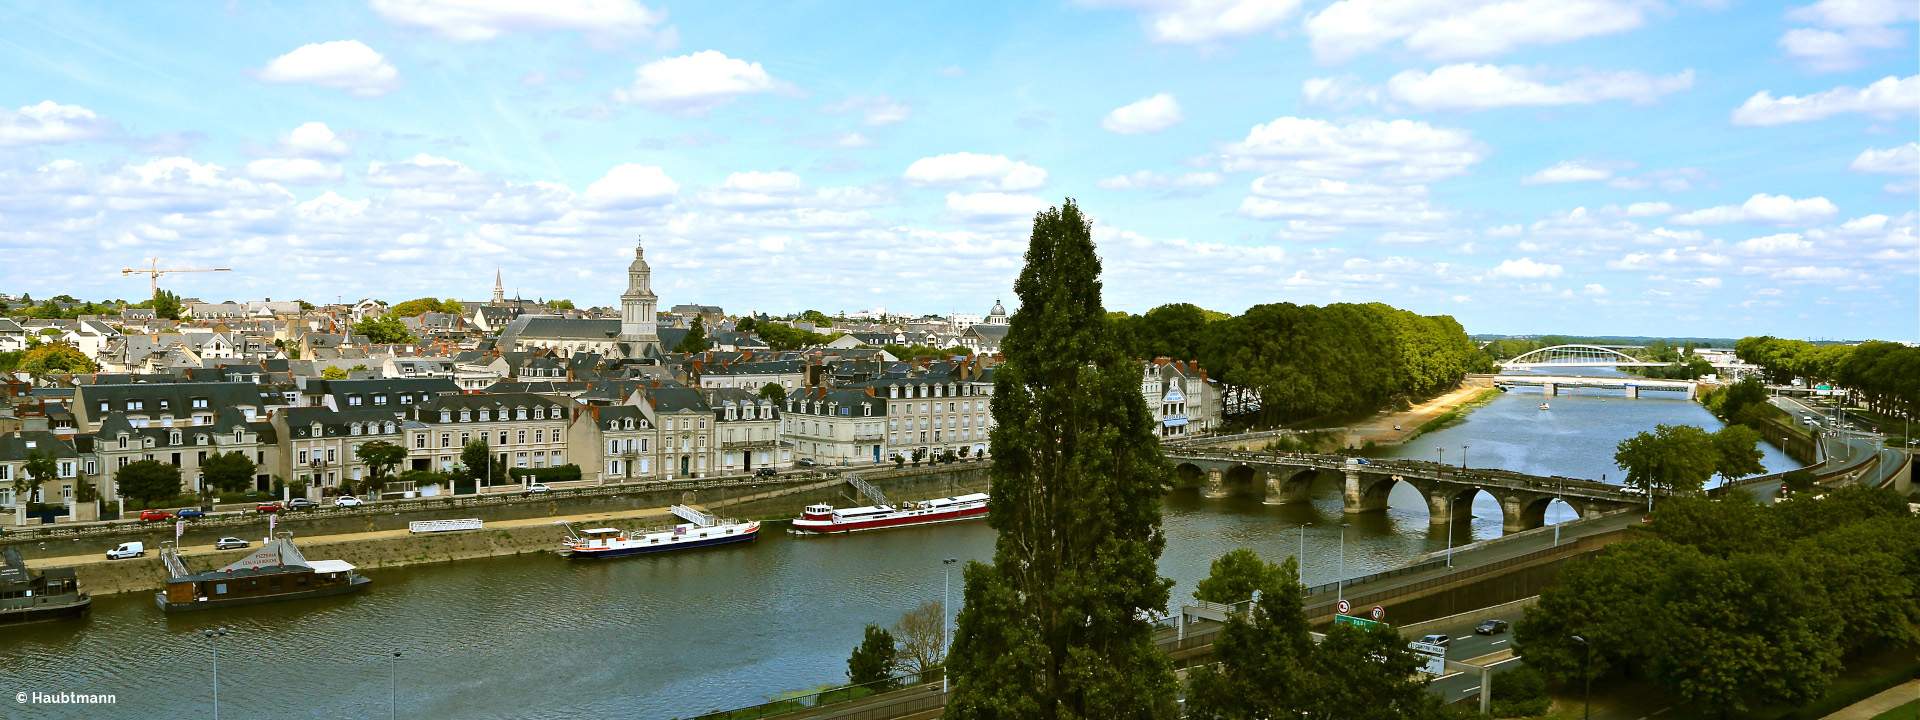 The Loire, a royal river between castles and vineyards